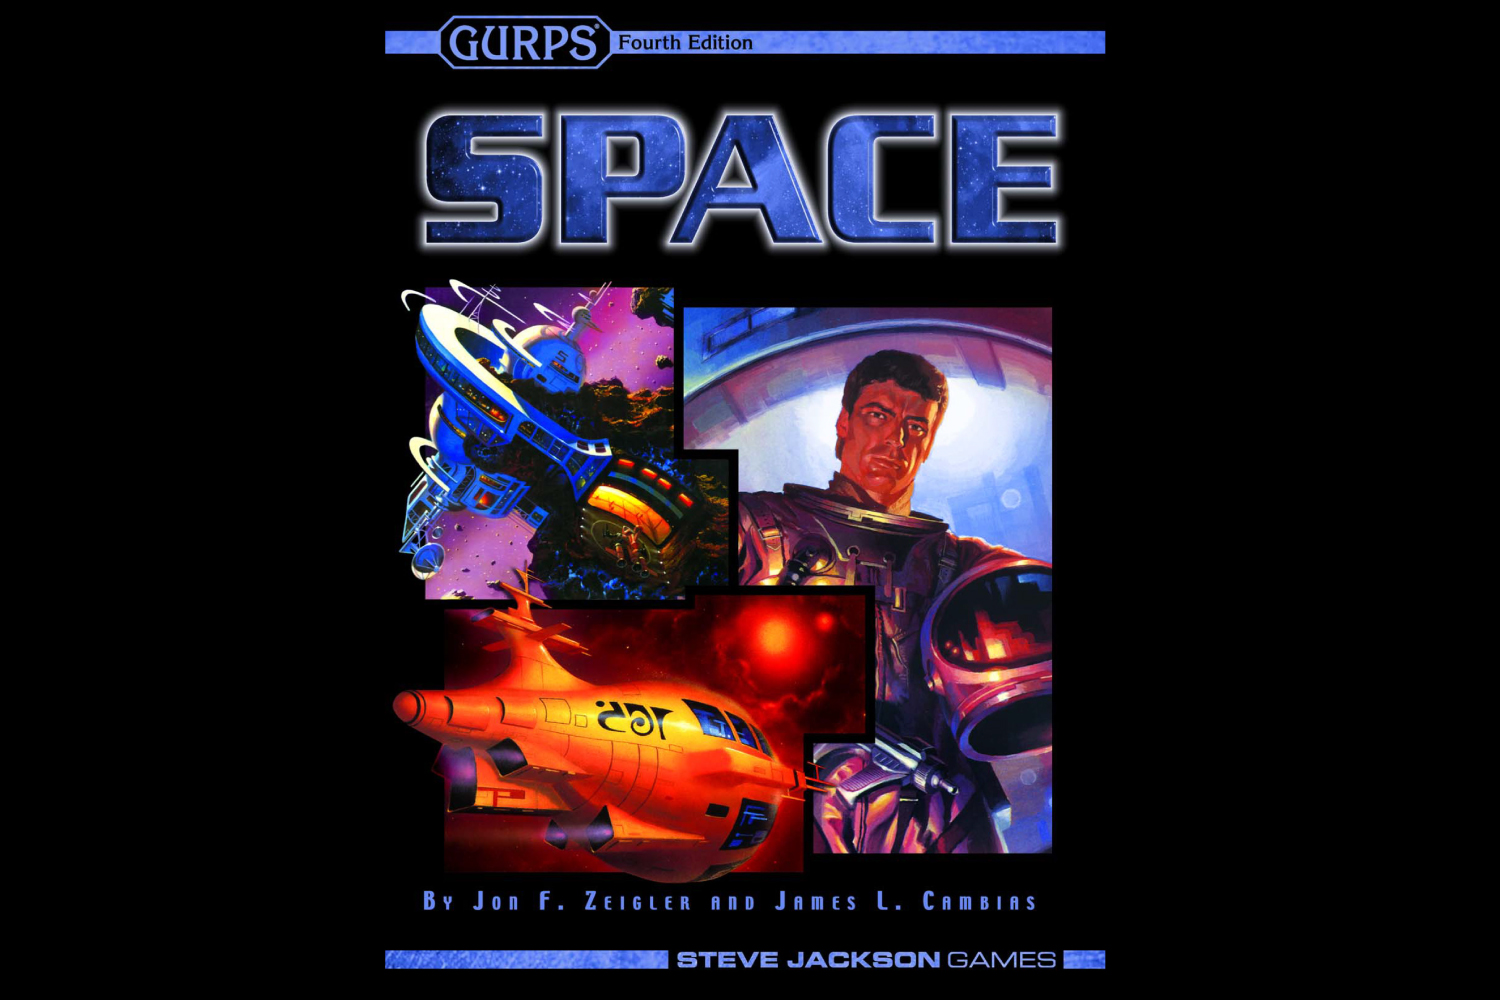 Get a Copy of GURPS Space (4e)--Today!